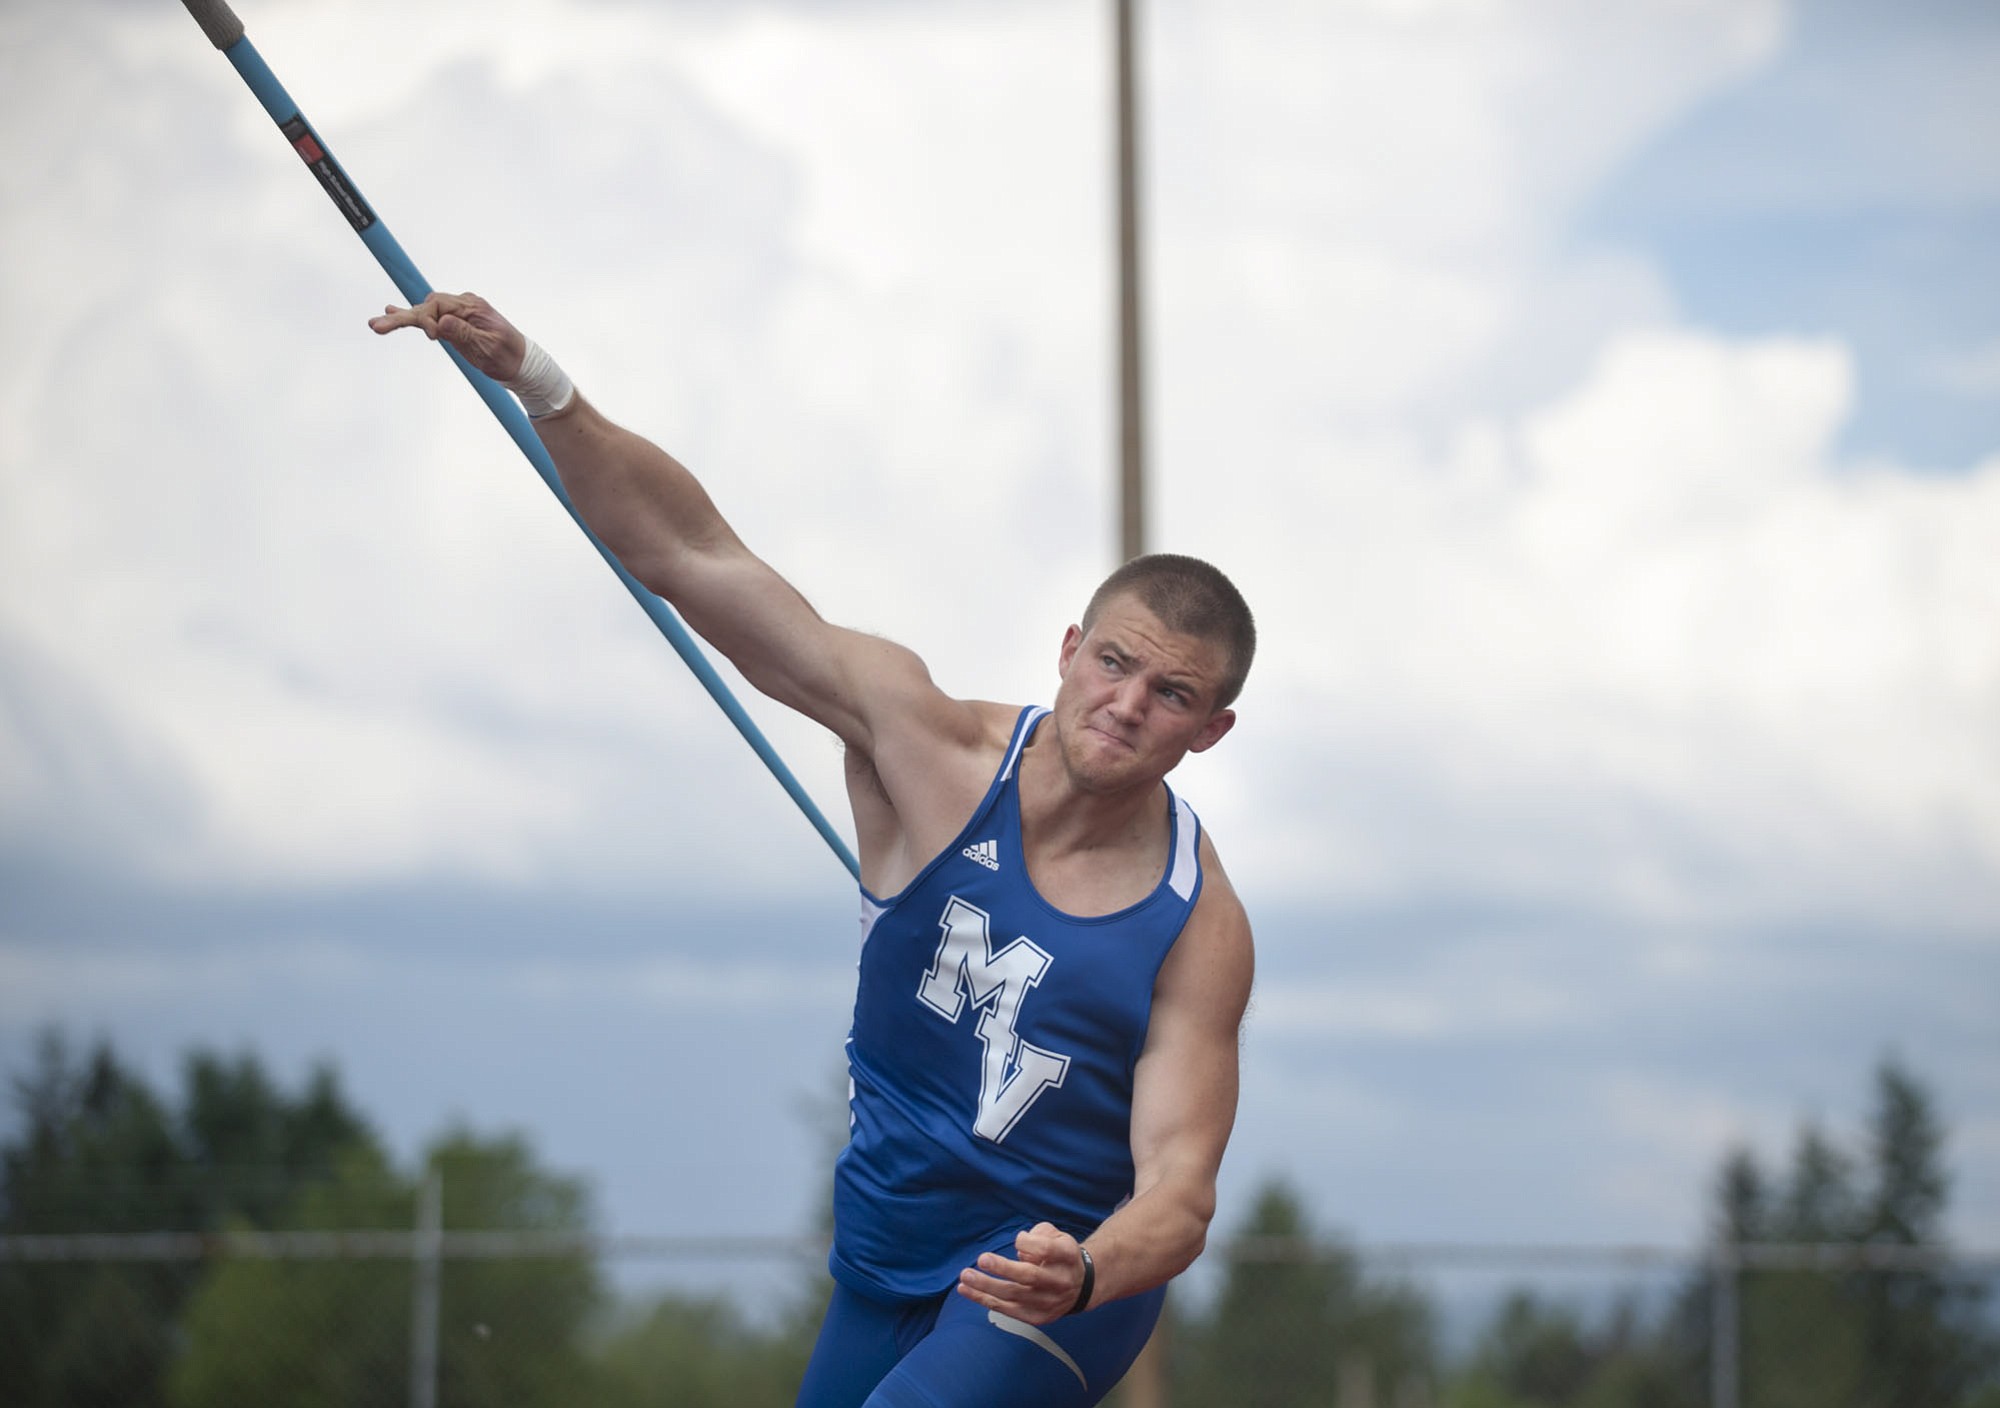 Mountain View senior Lexington Reese won the javelin at the Class 4A District meet with a throw of 193 feet, 11 inches on Monday at McKenzie Stadium.